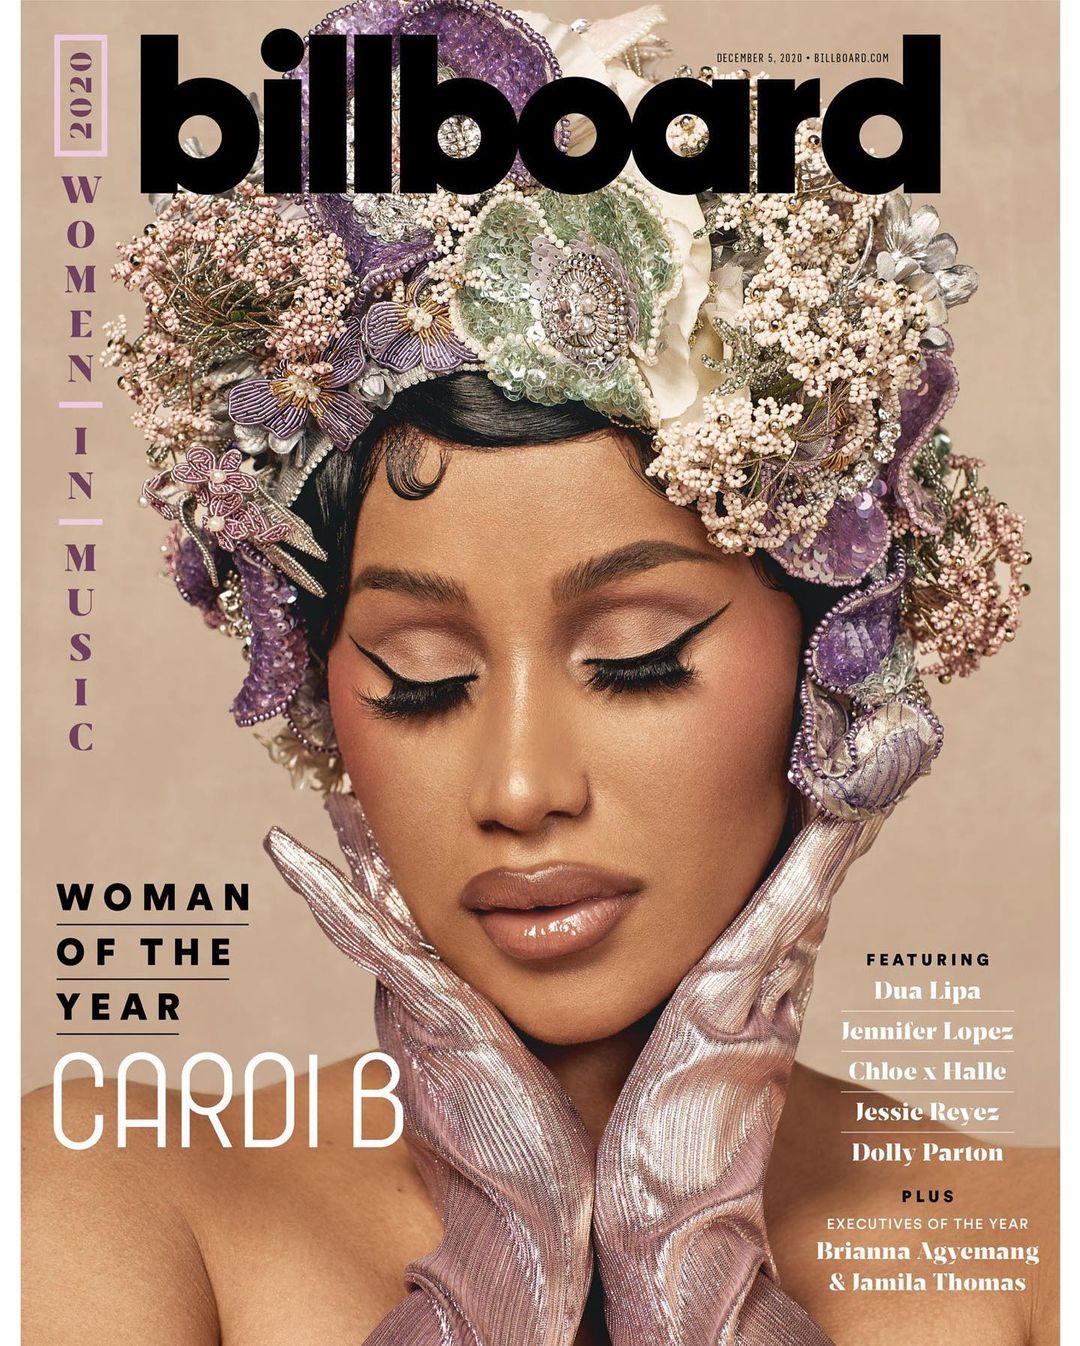 Cardi B Talks WAP, Politics And Business On Her Cover Feature As Billboard Woman of The Year 2020 2